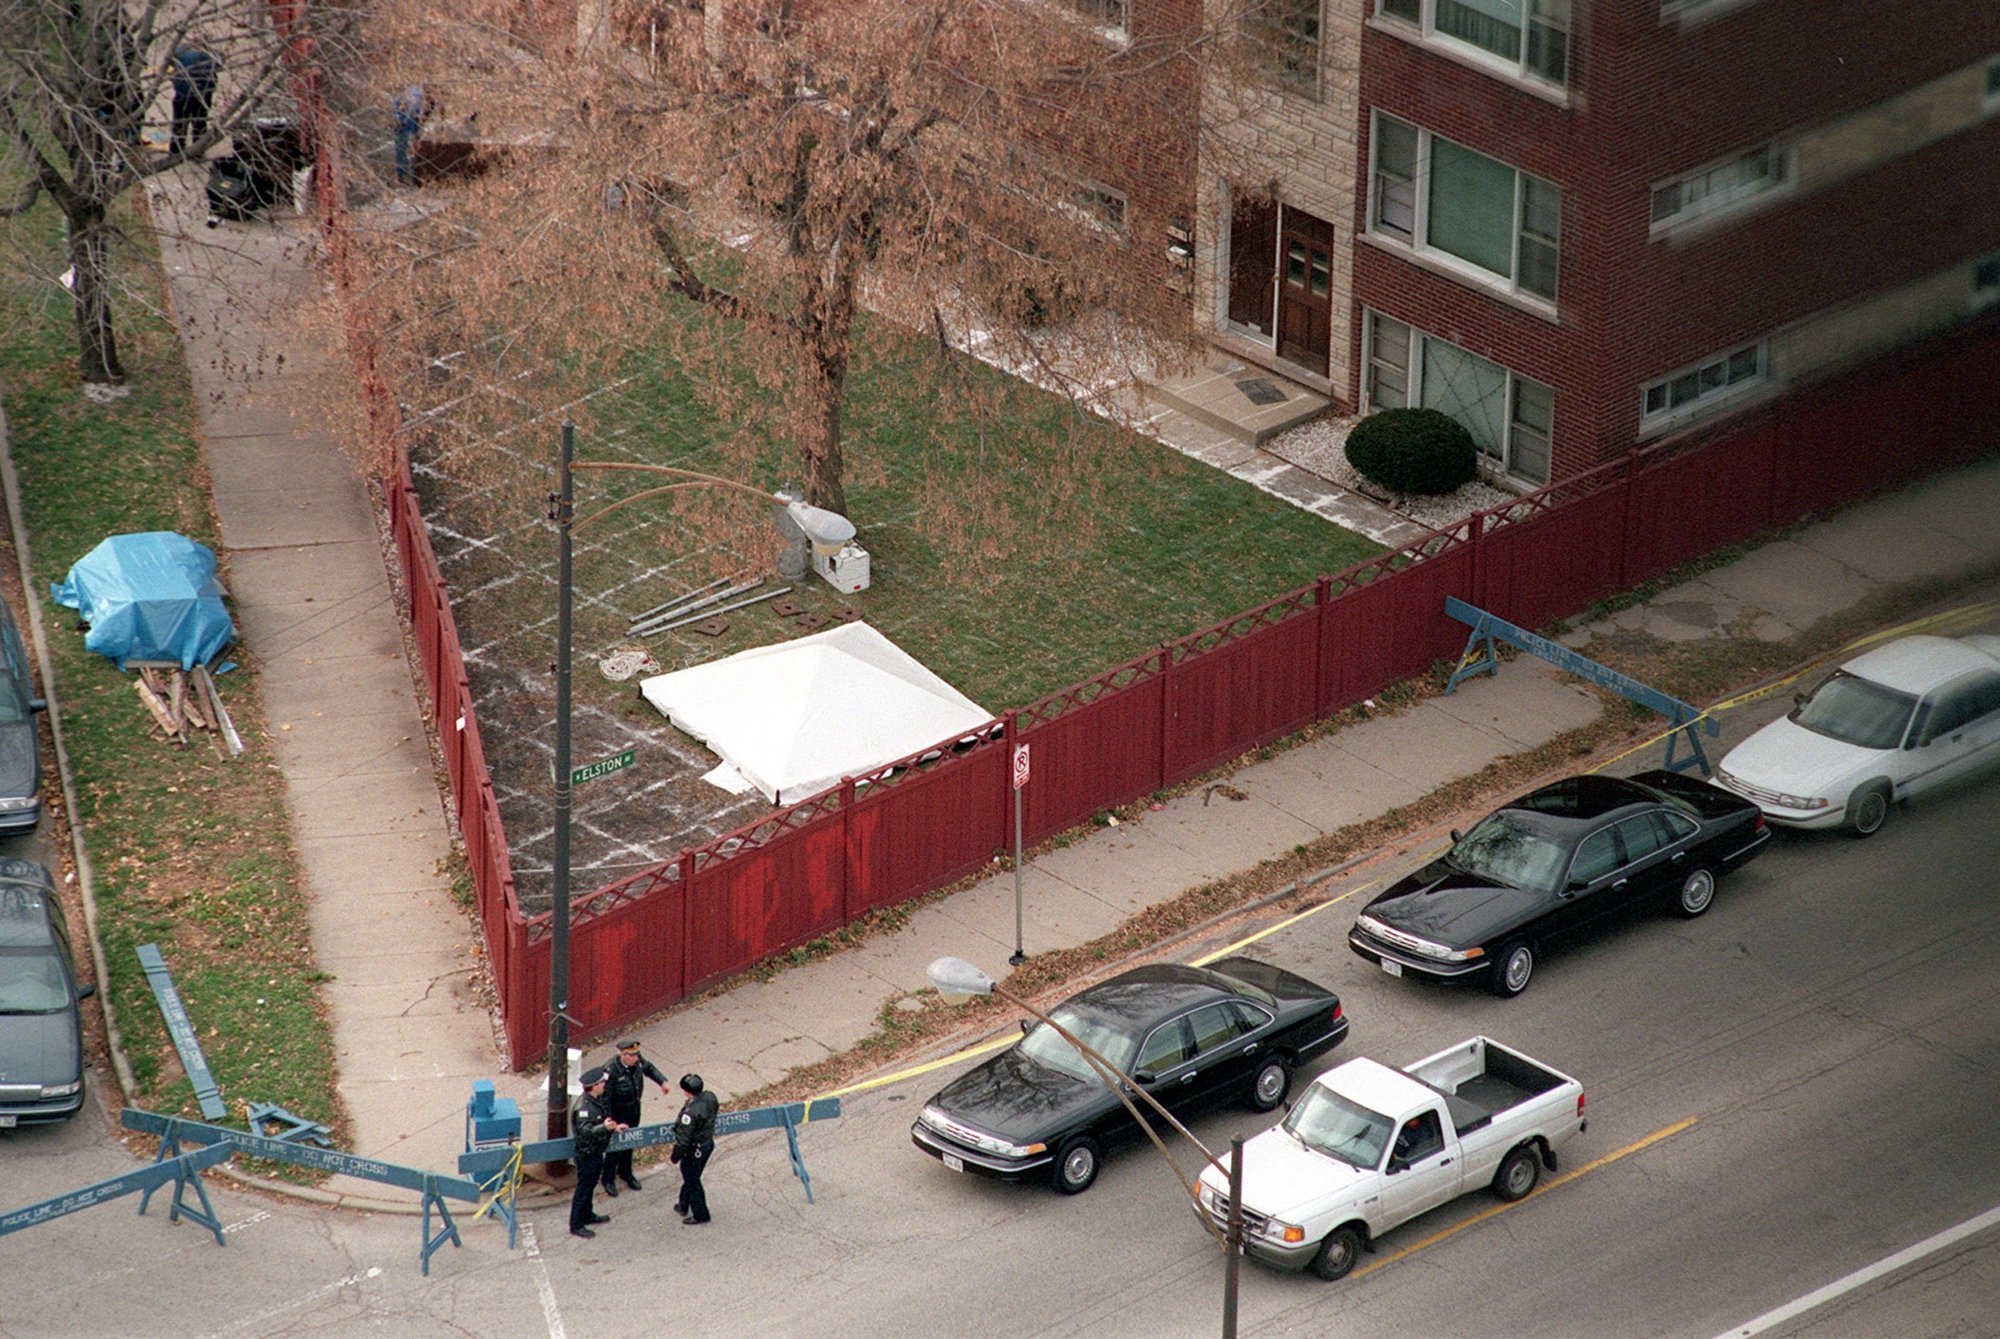 John Wayne Gacy excavation location overhead with a white tent over the dig site and cars in the street